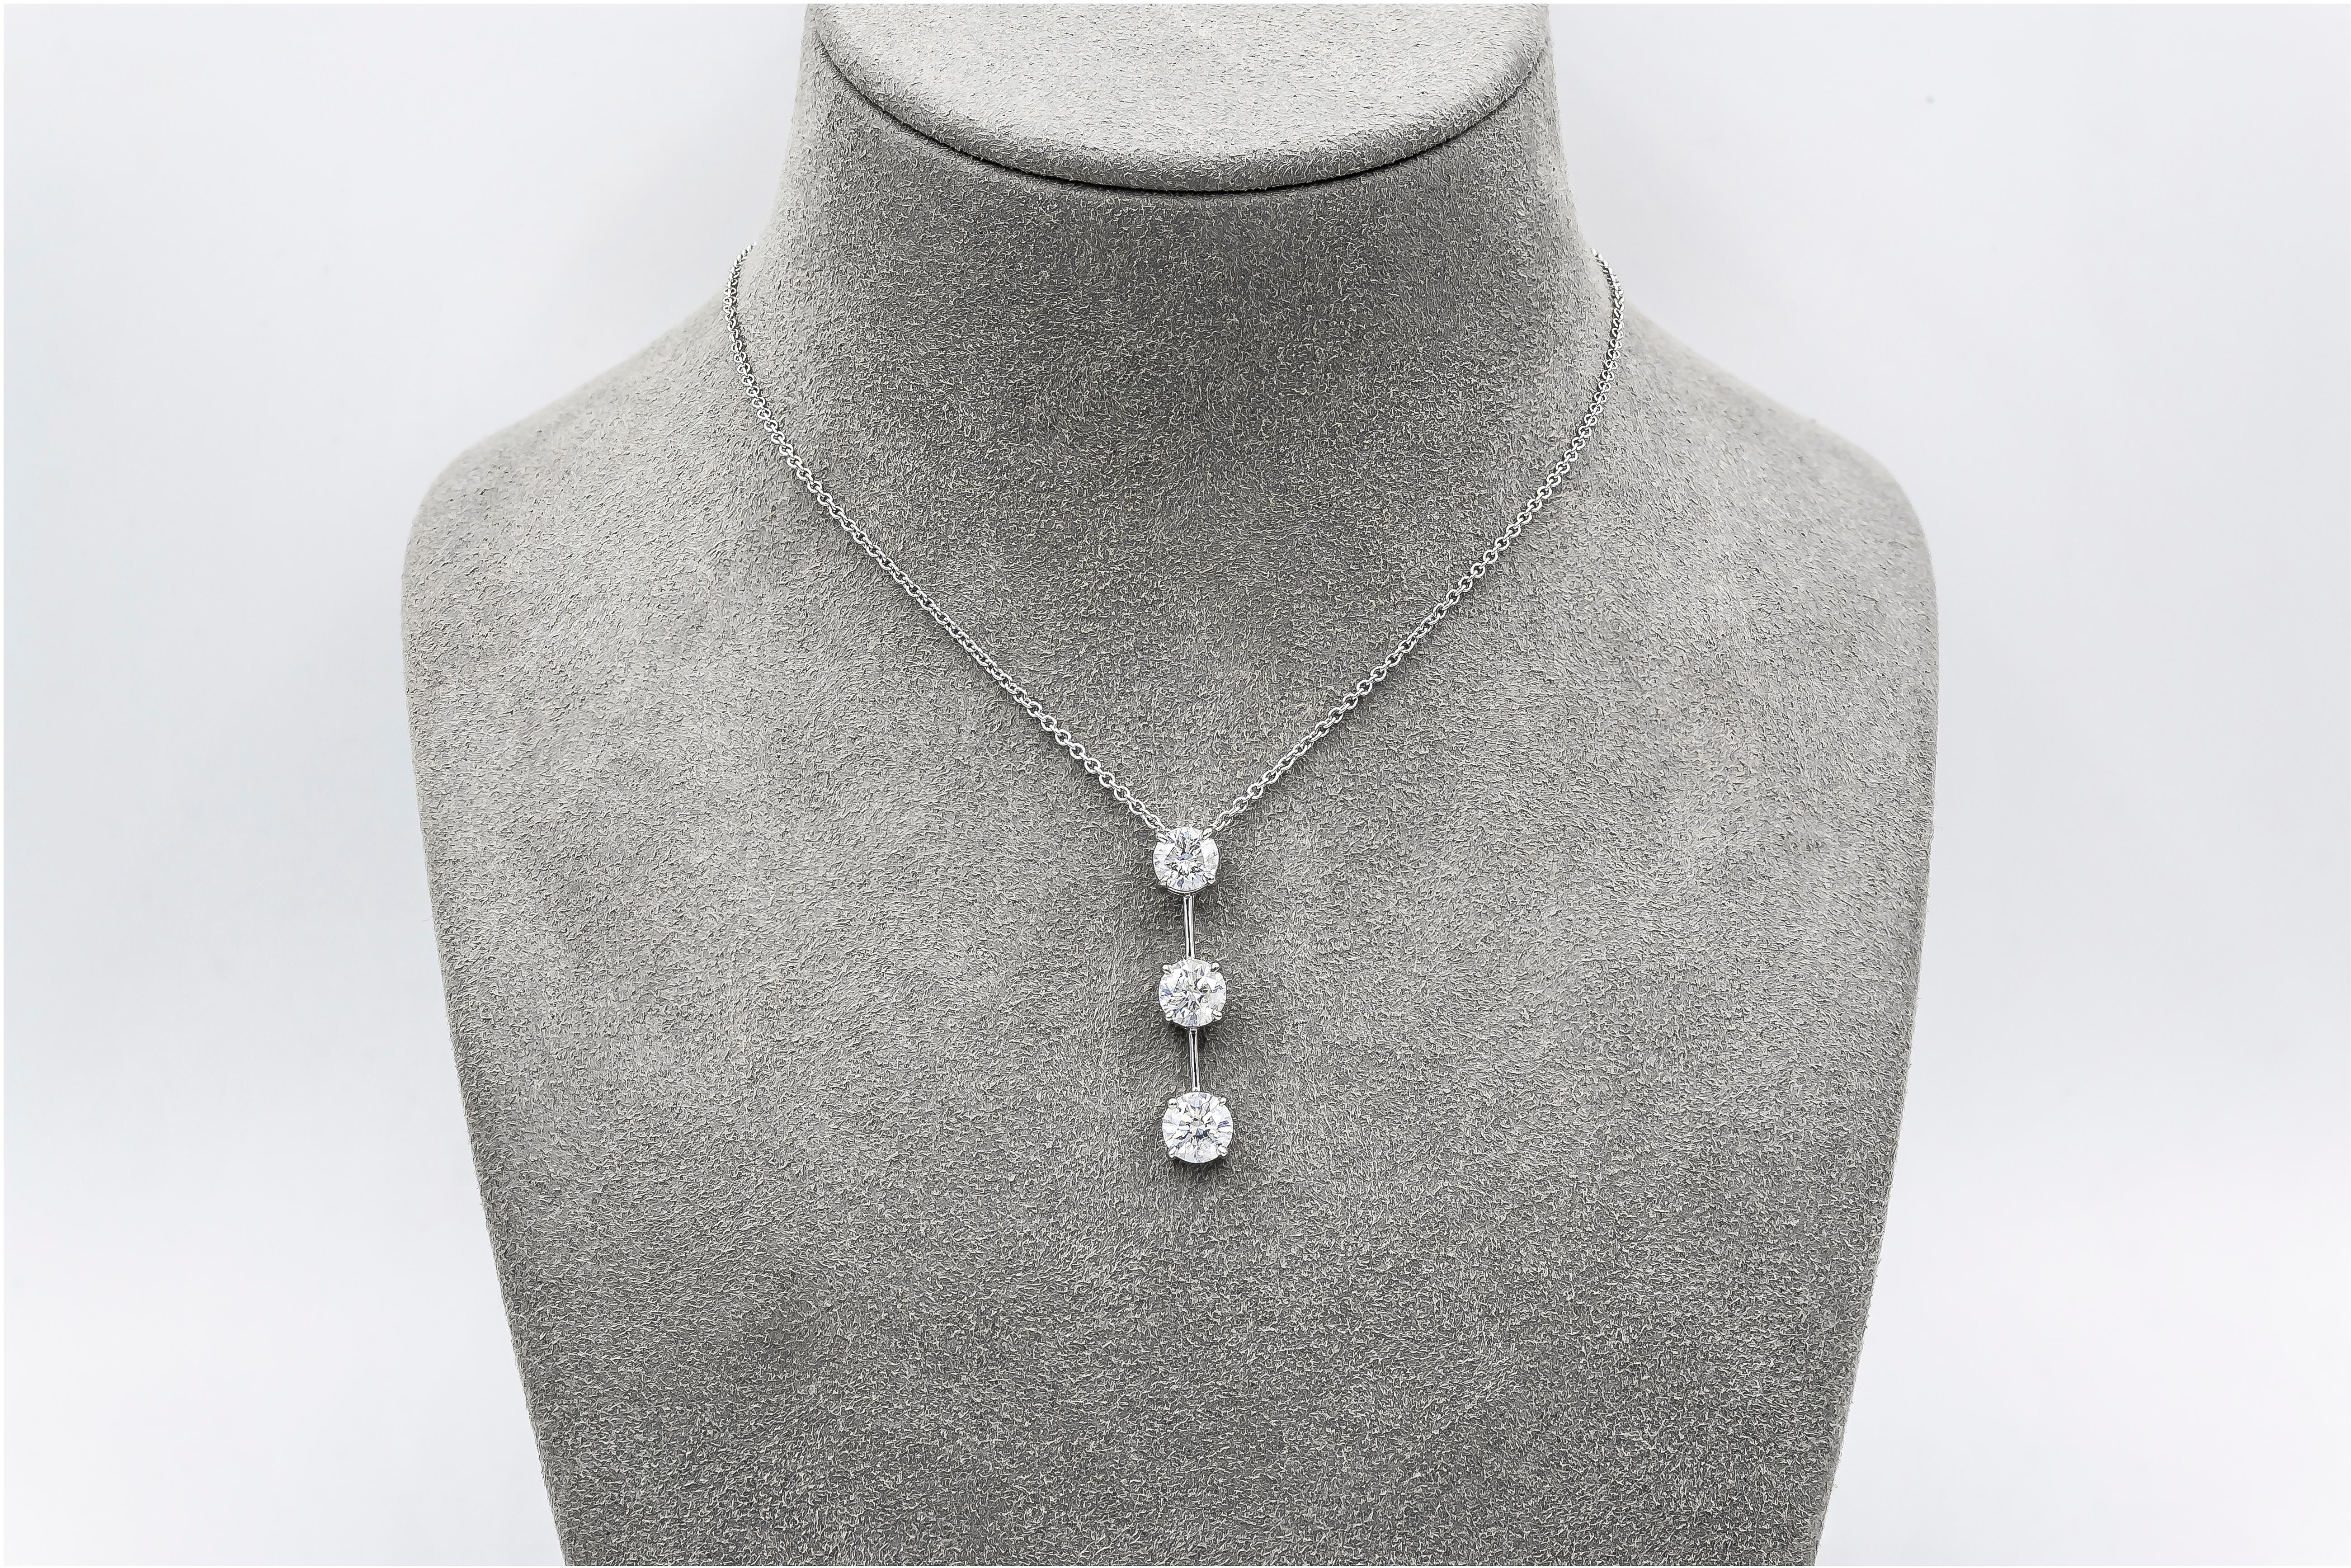 A brilliant pendant necklace showcasing three round brilliant diamonds, set in a line. Composition made in 14 karat white gold. Diamonds weigh 3.10 carats total.

Style available in different price ranges. Prices are based on your selection of the